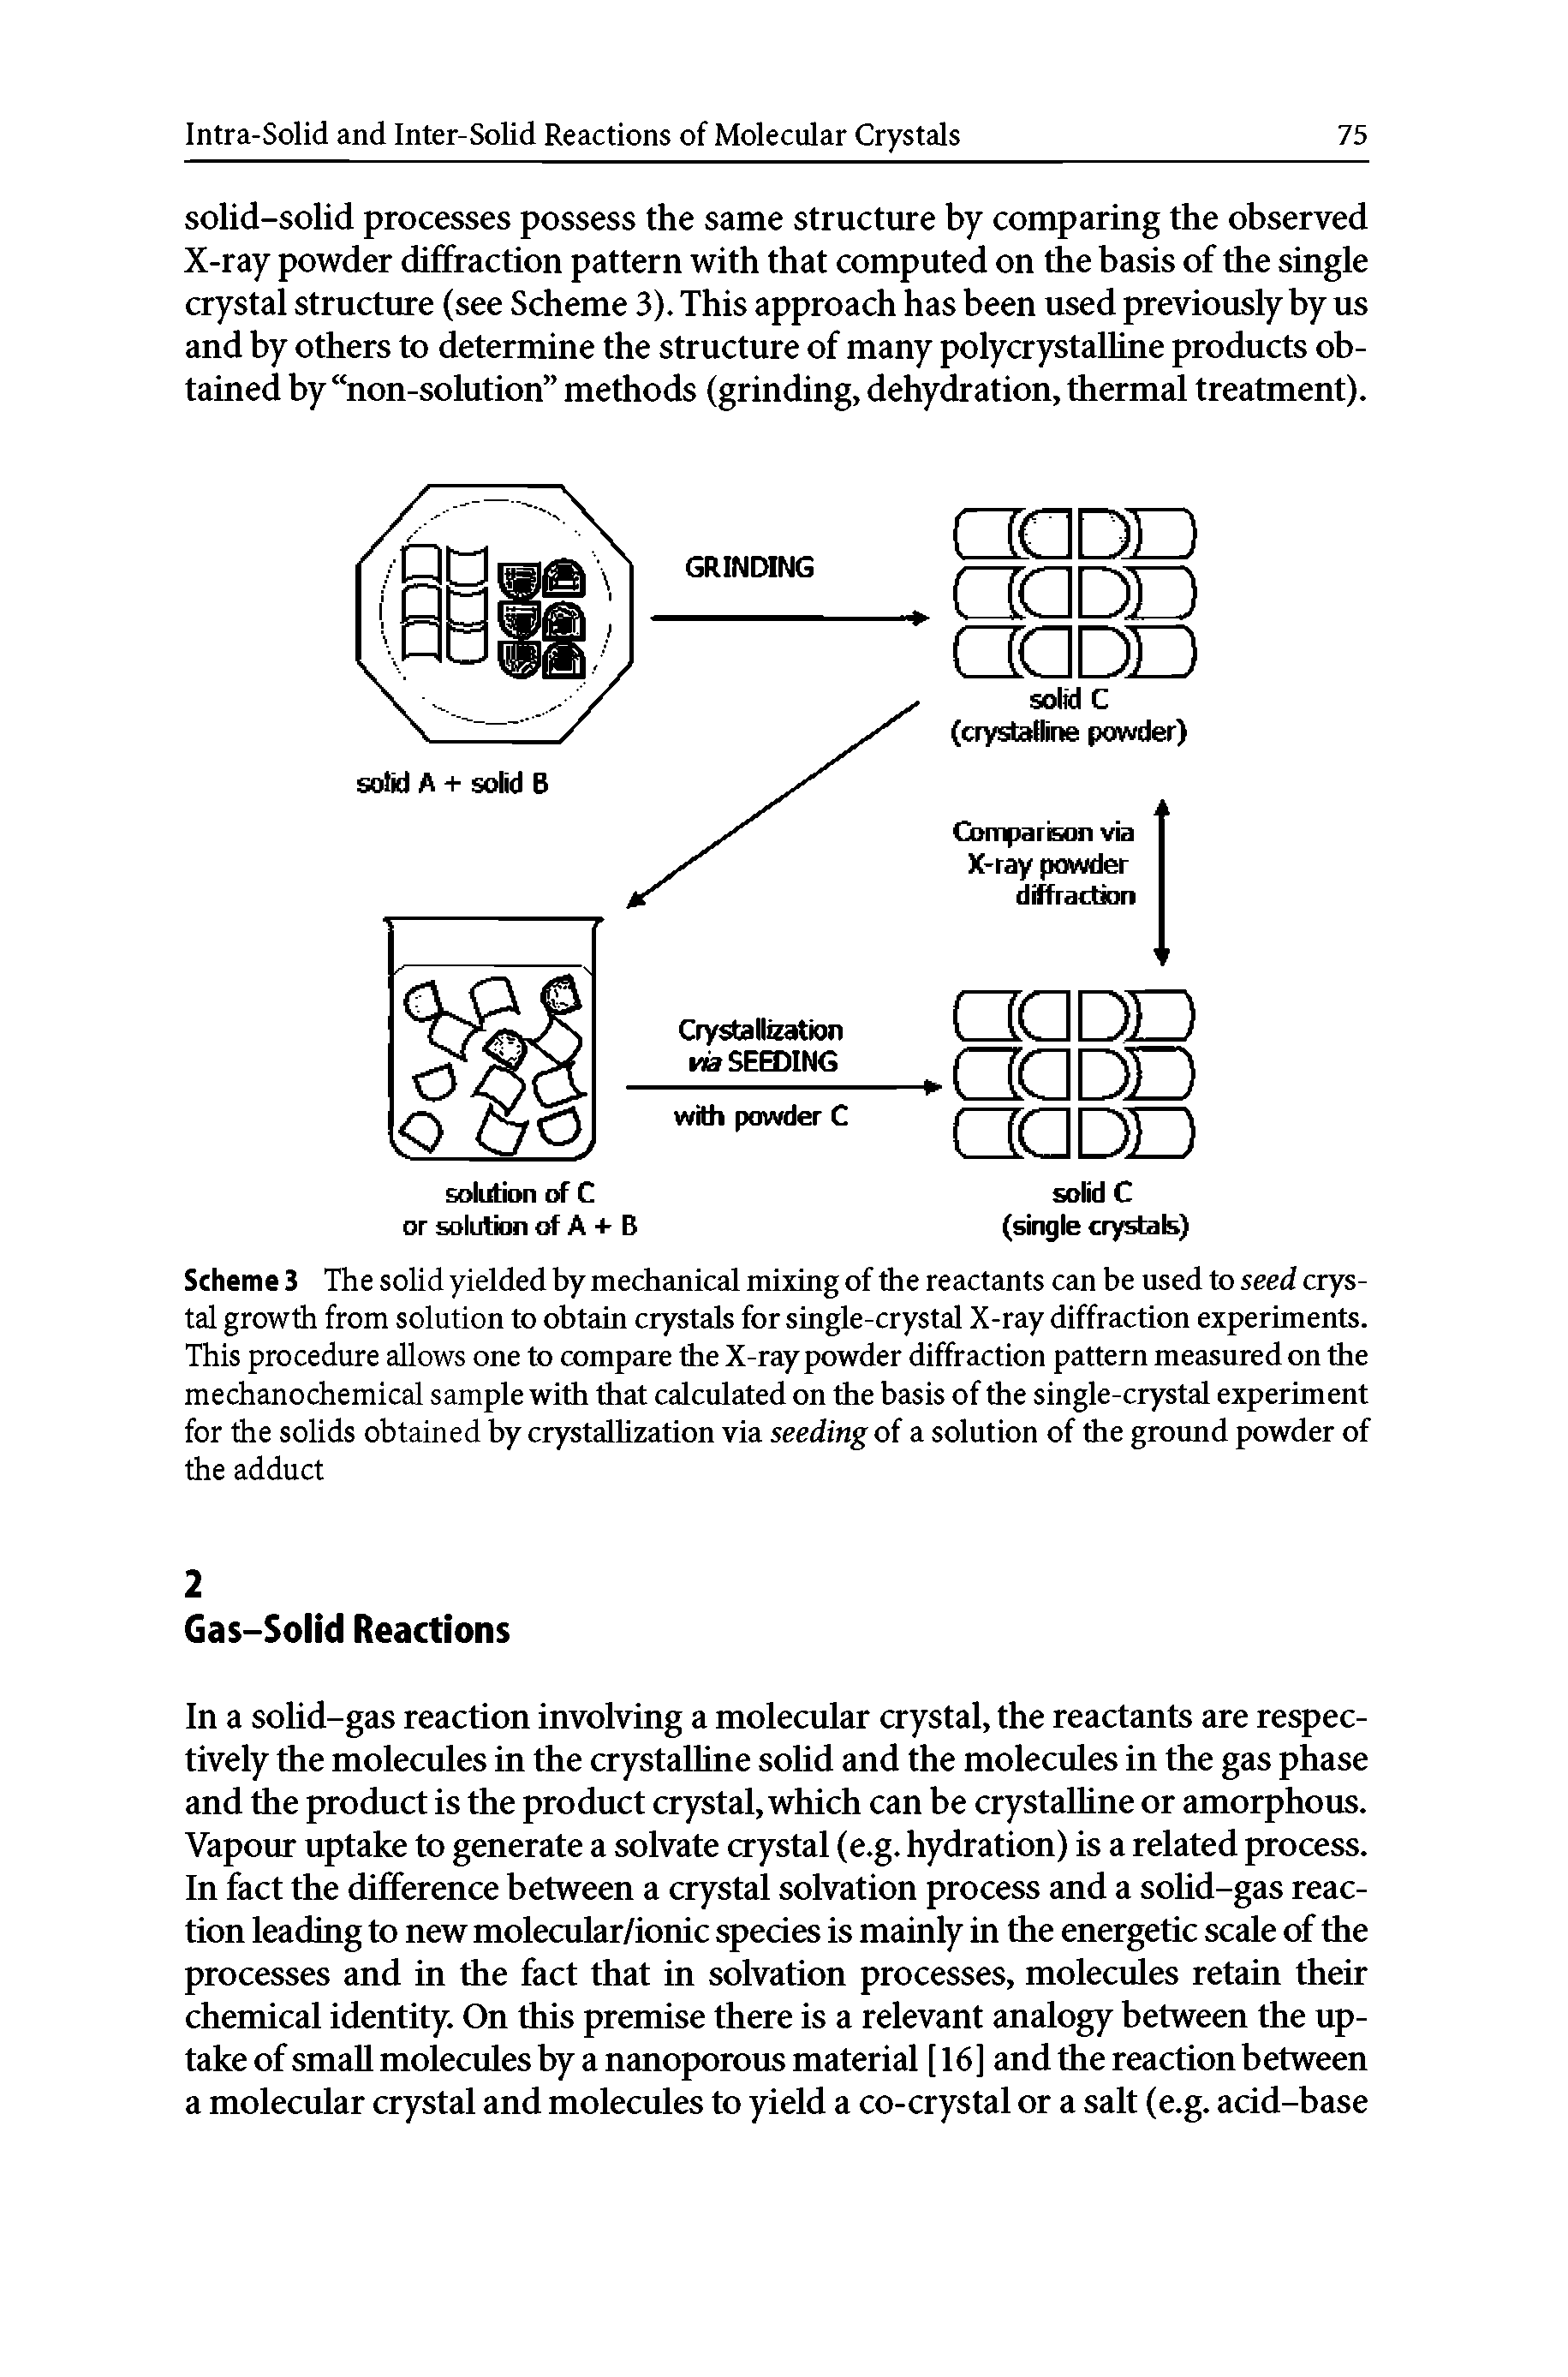 Scheme 3 The solid yielded by mechanical mixing of the reactants can be used to seed crystal growth from solution to obtain crystals for single-crystal X-ray diffraction experiments. This procedure allows one to compare the X-ray powder diffraction pattern measured on the mechanochemical sample with that calculated on the basis of the single-crystal experiment for the solids obtained by crystallization via seeding of a solution of the ground powder of the adduct...